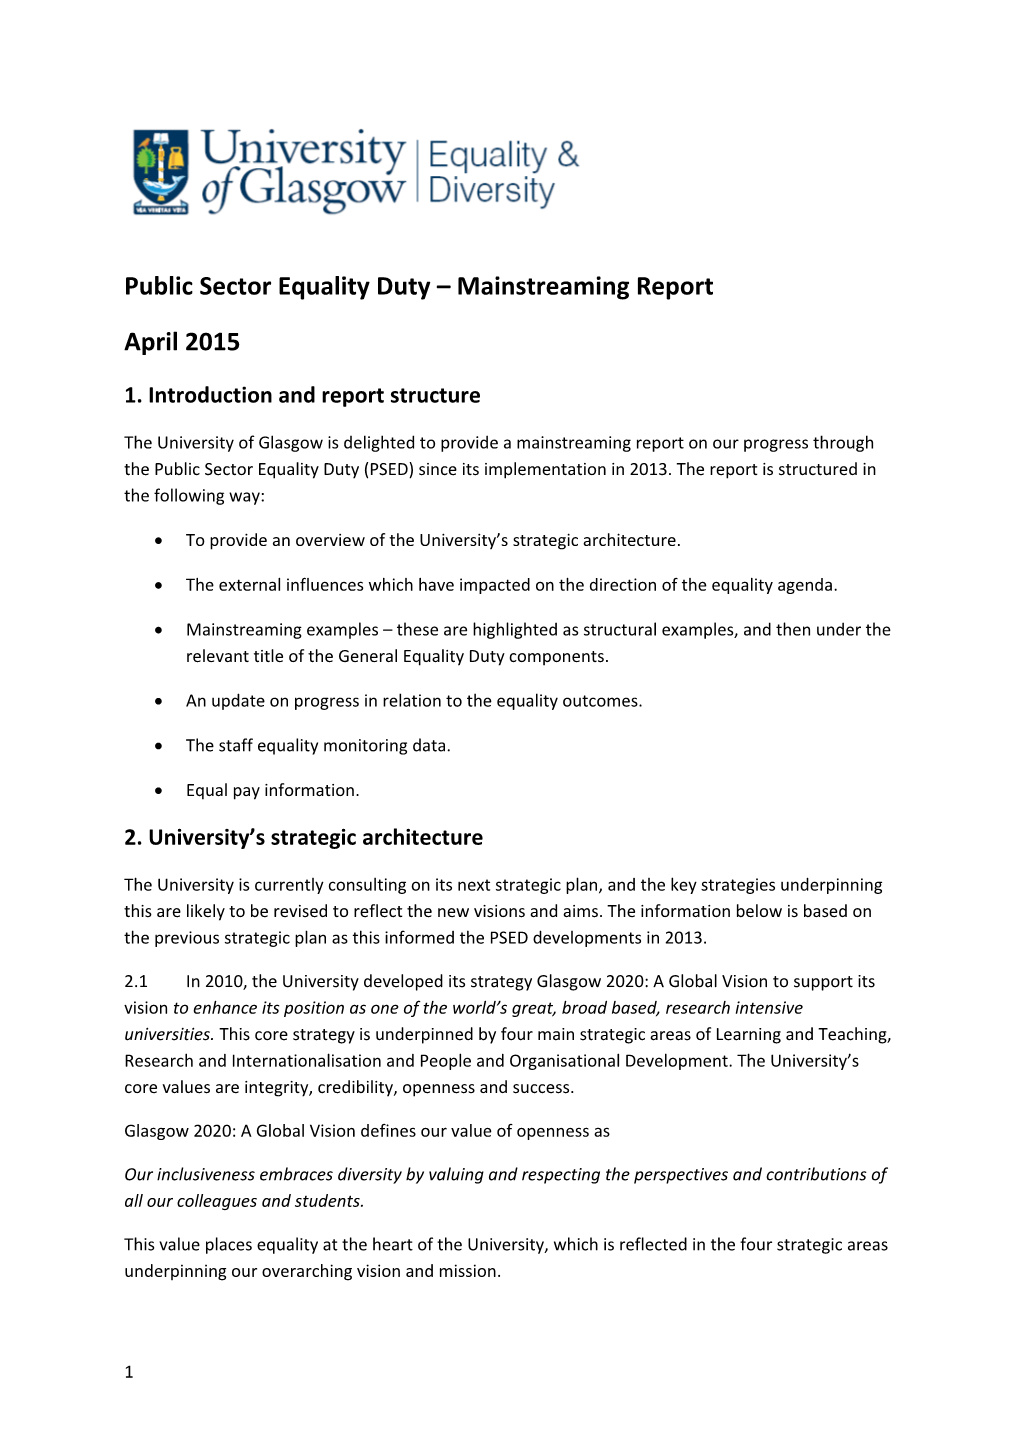 Public Sector Equality Duty Mainstreaming Report